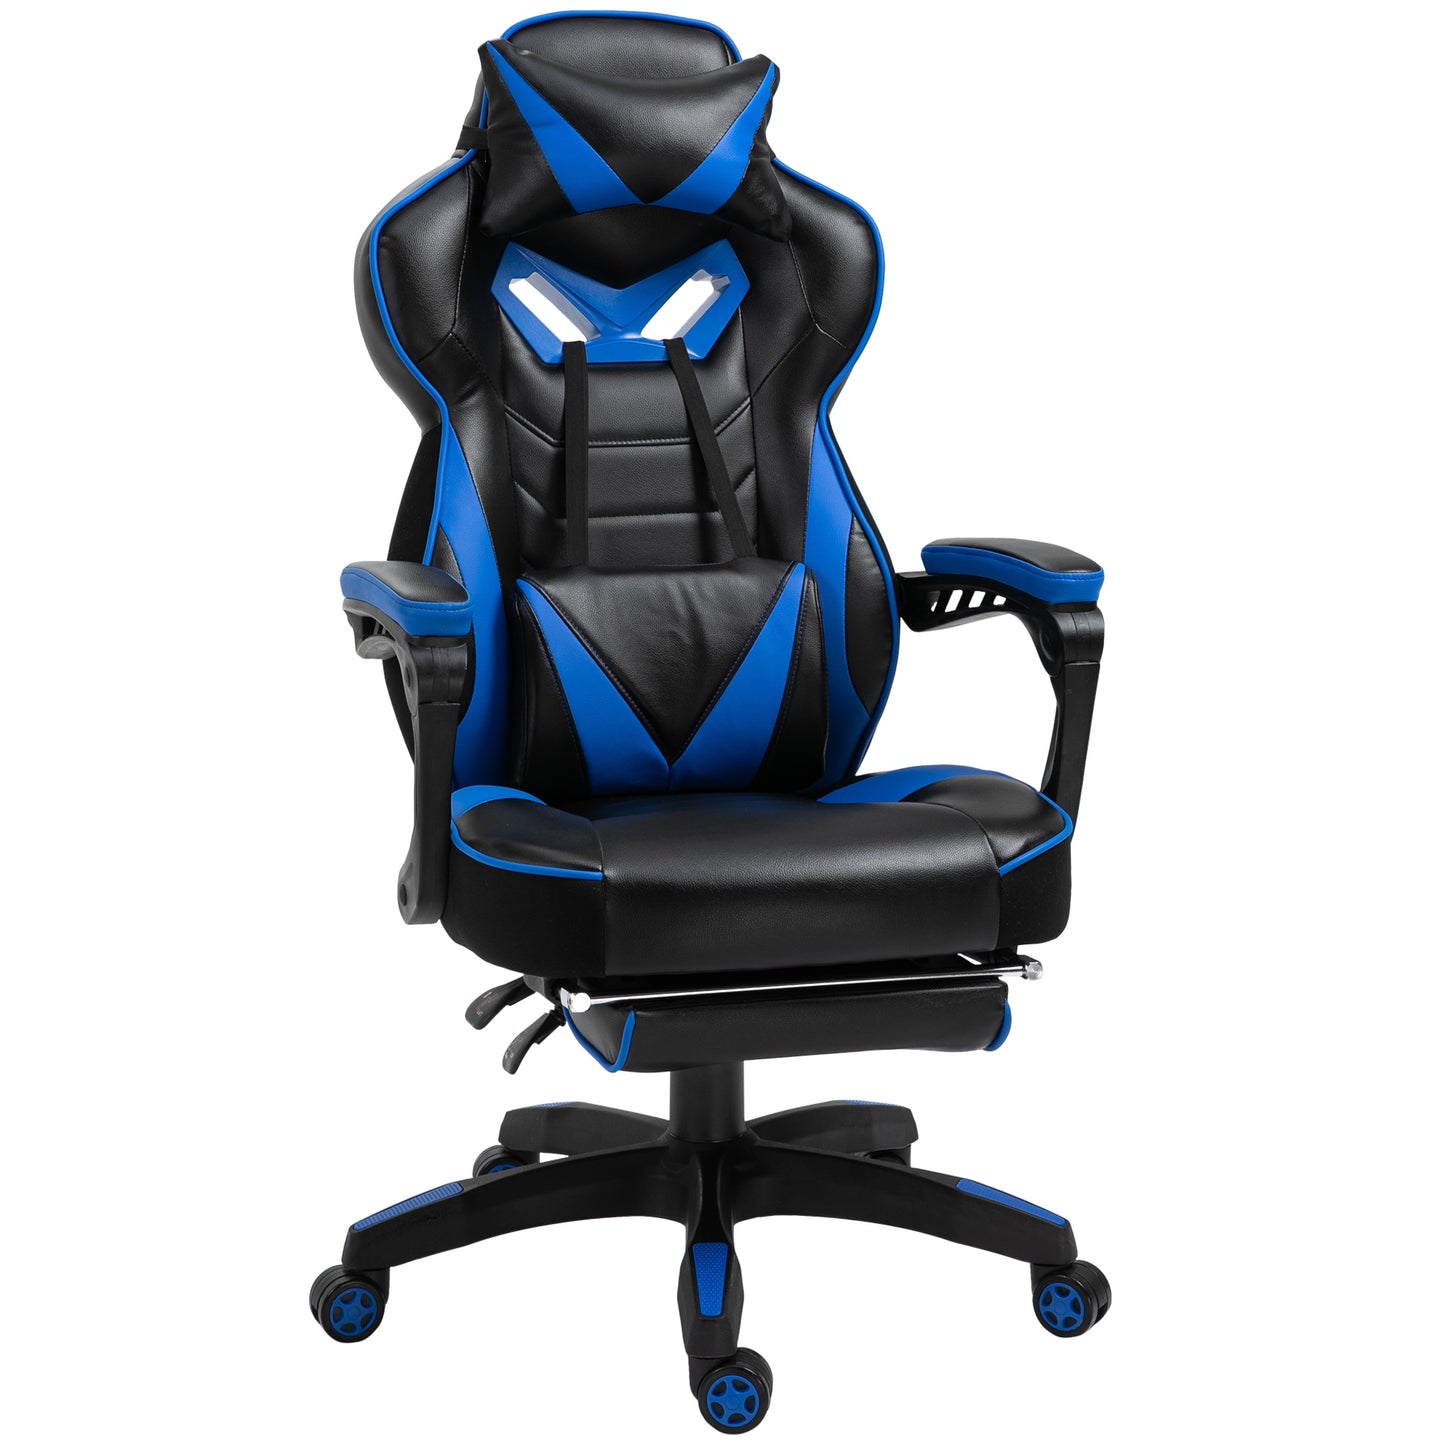 Vinsetto PU Leather Retractable Footrest Gaming Chair w/ Pillows Blue/Black